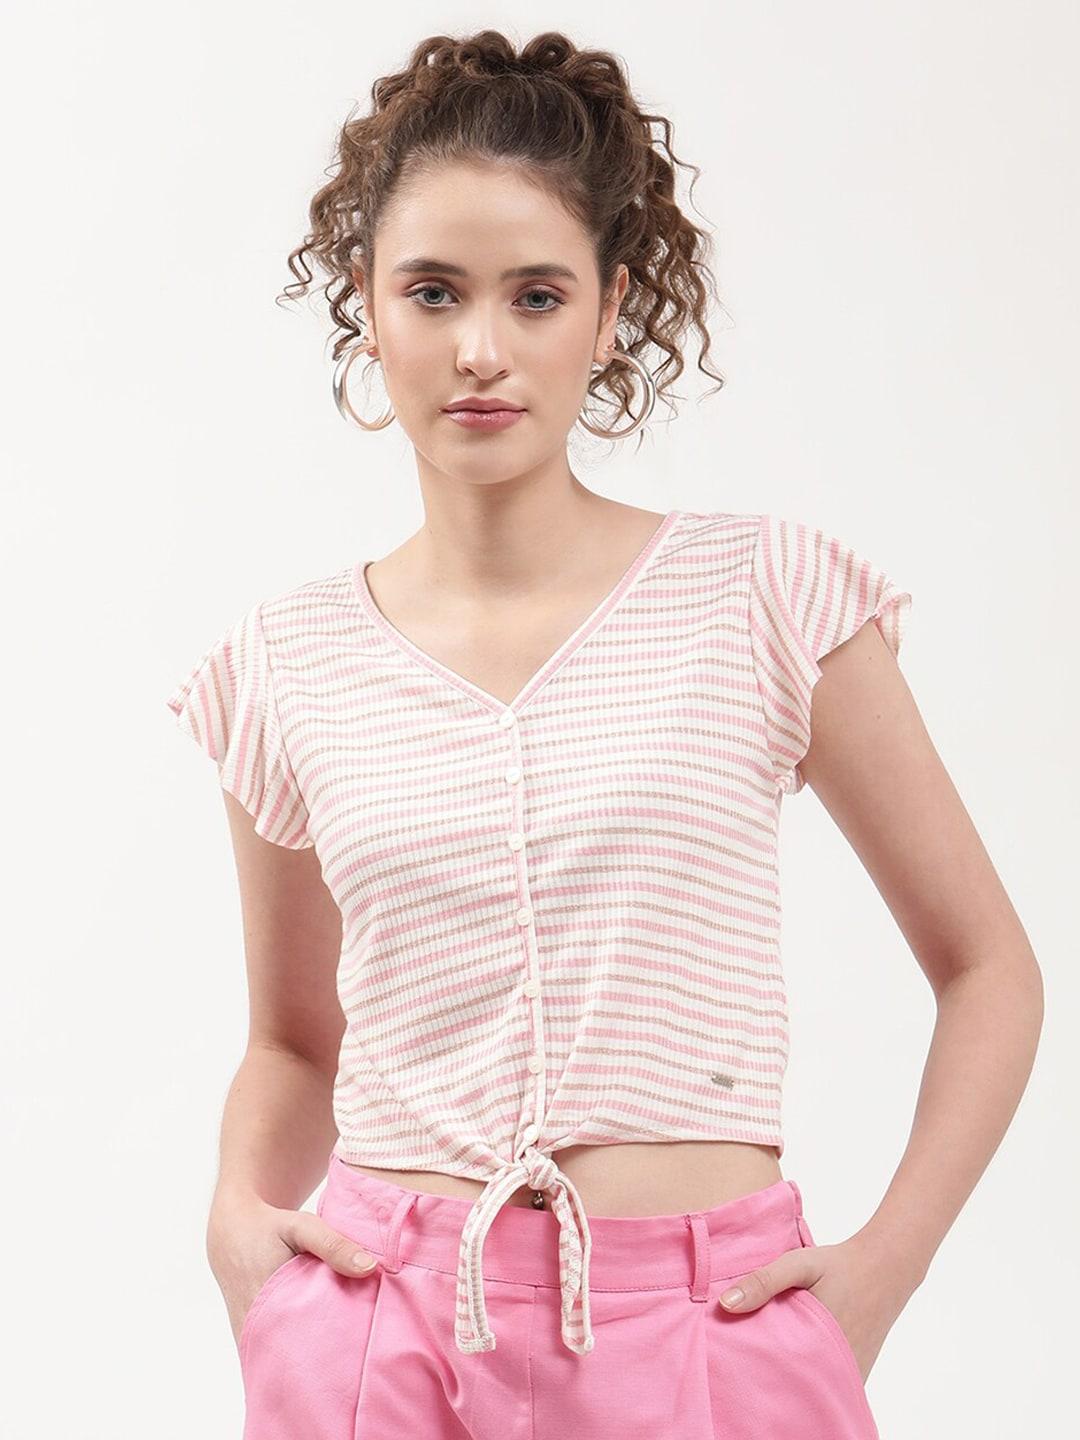 elle-pink-&-off-white-striped-cotton-shirt-style-crop-top